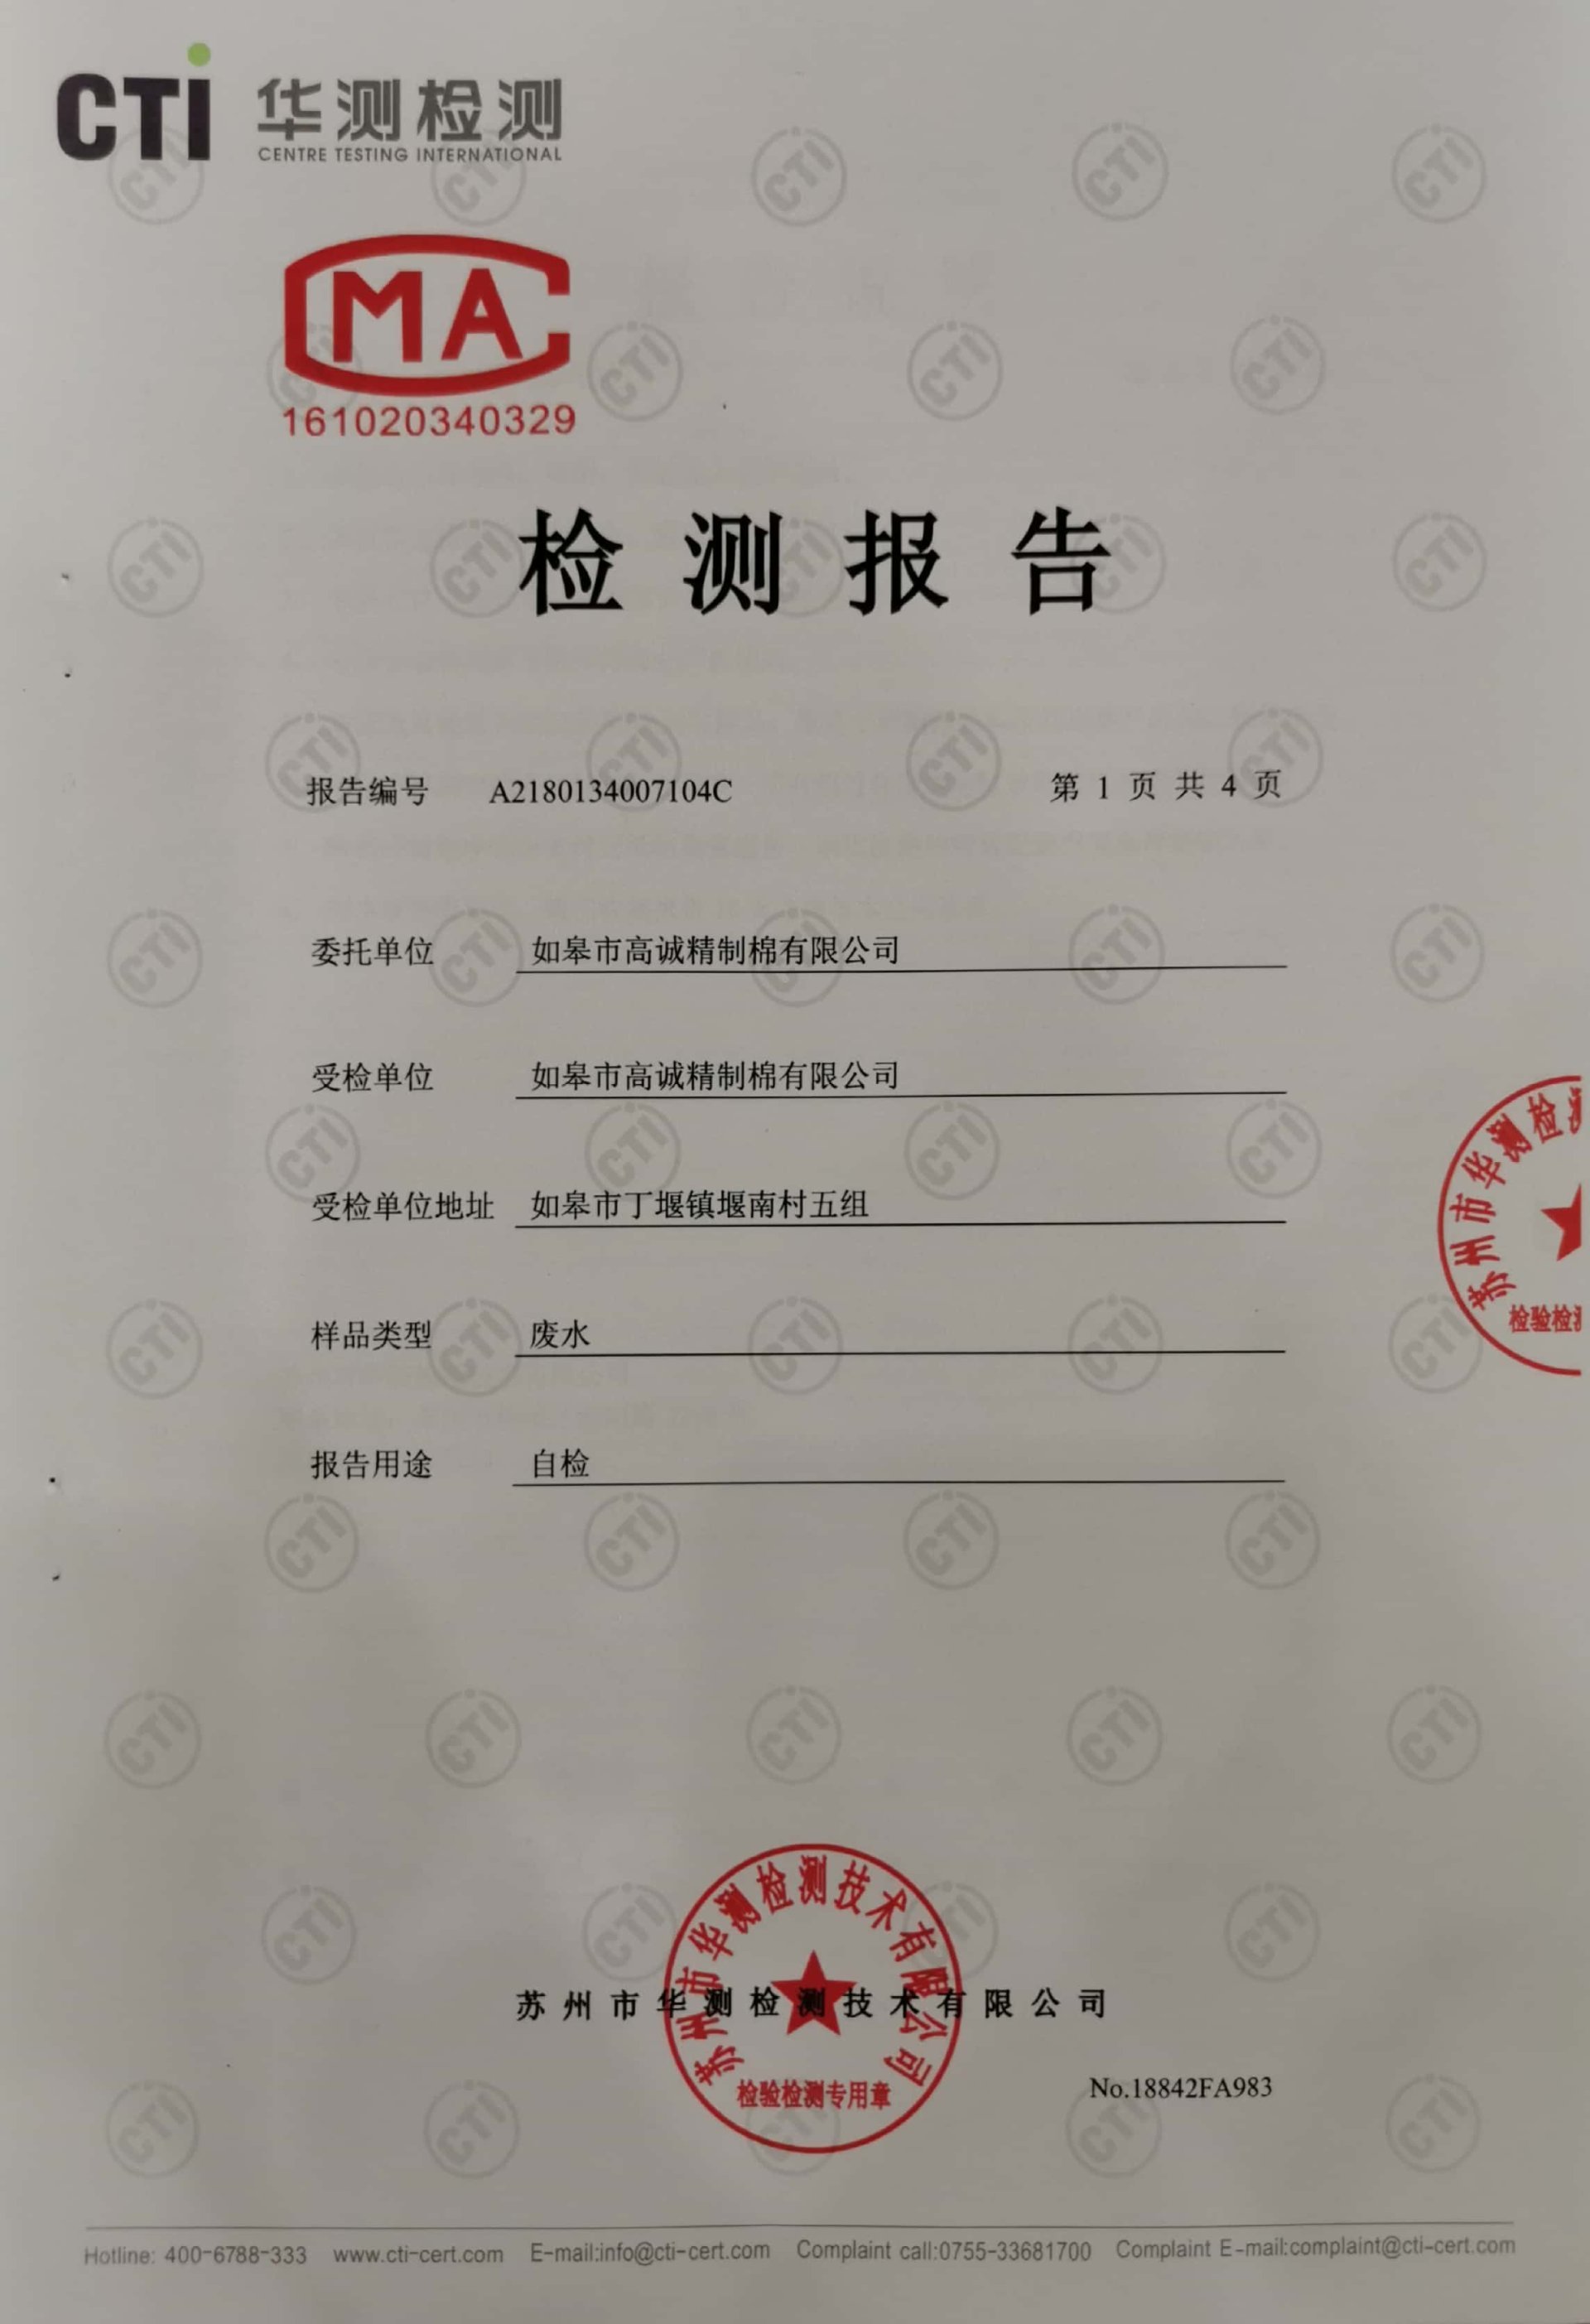 Wastewater Testing Report of Rugao Gaocheng Refined Cotton Co., Ltd